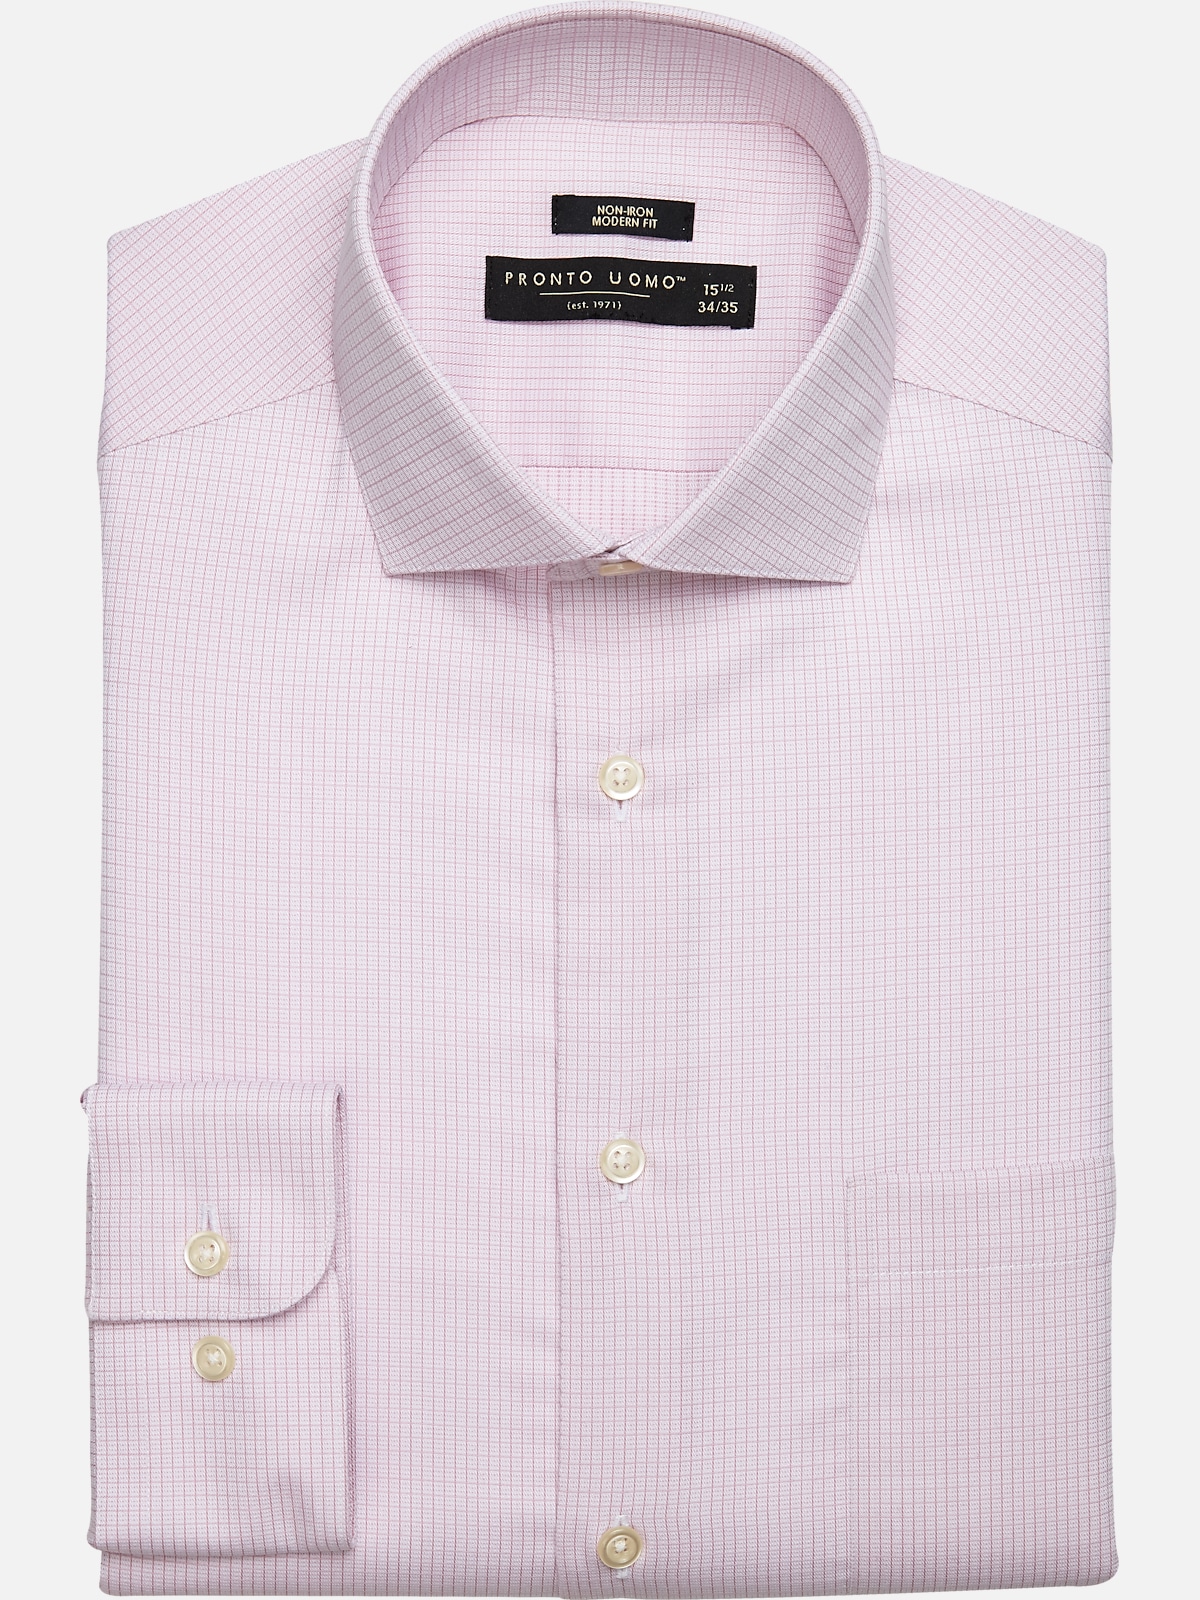 Pronto Uomo Modern Fit Check Dress Shirt | All Clearance $39.99| Men's ...